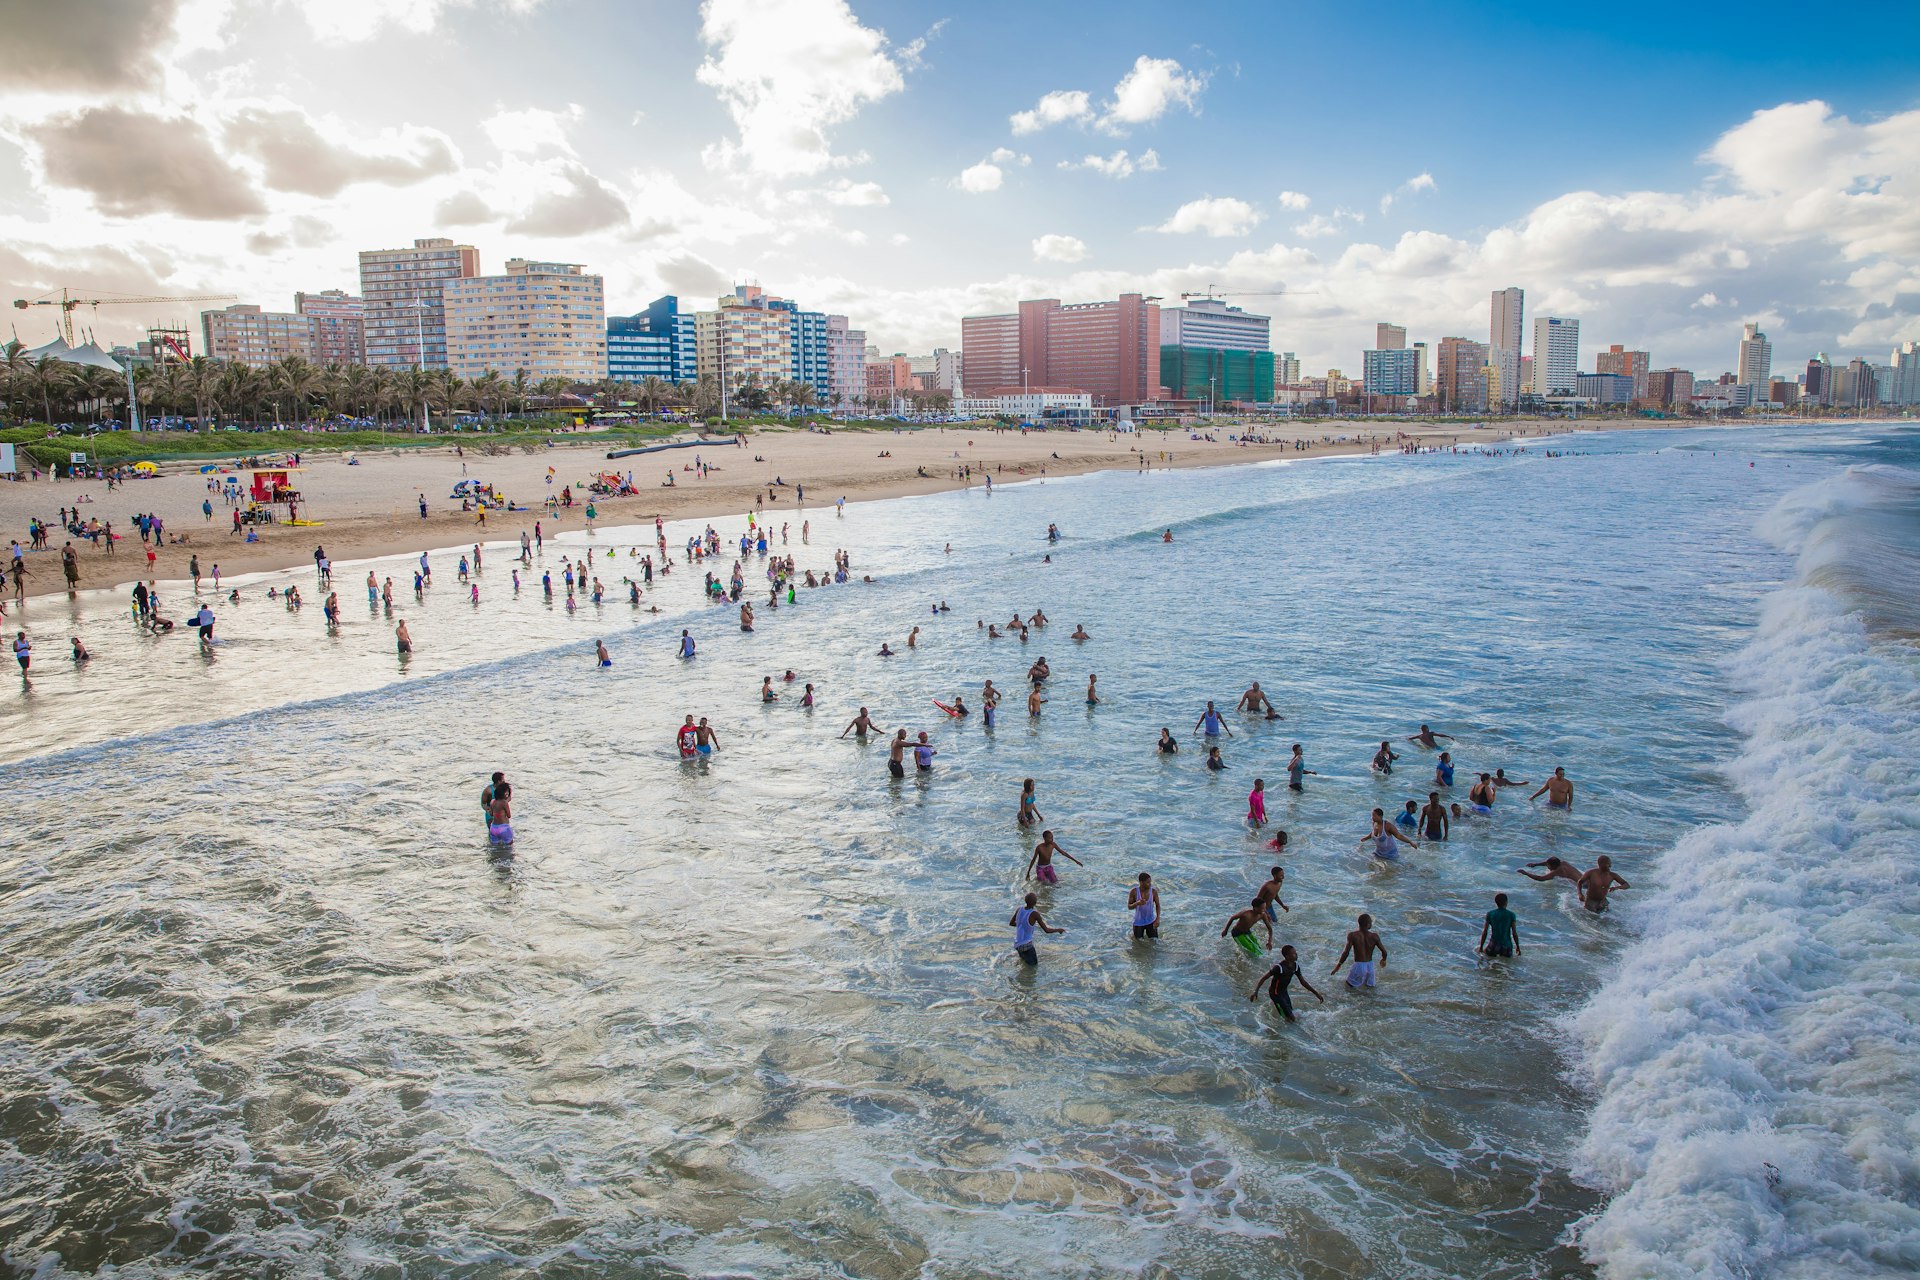 An aerial view of the beach near Durban, South Africa, where people are playing in the waves. In the background, some of the city's skyscrapers are visible.